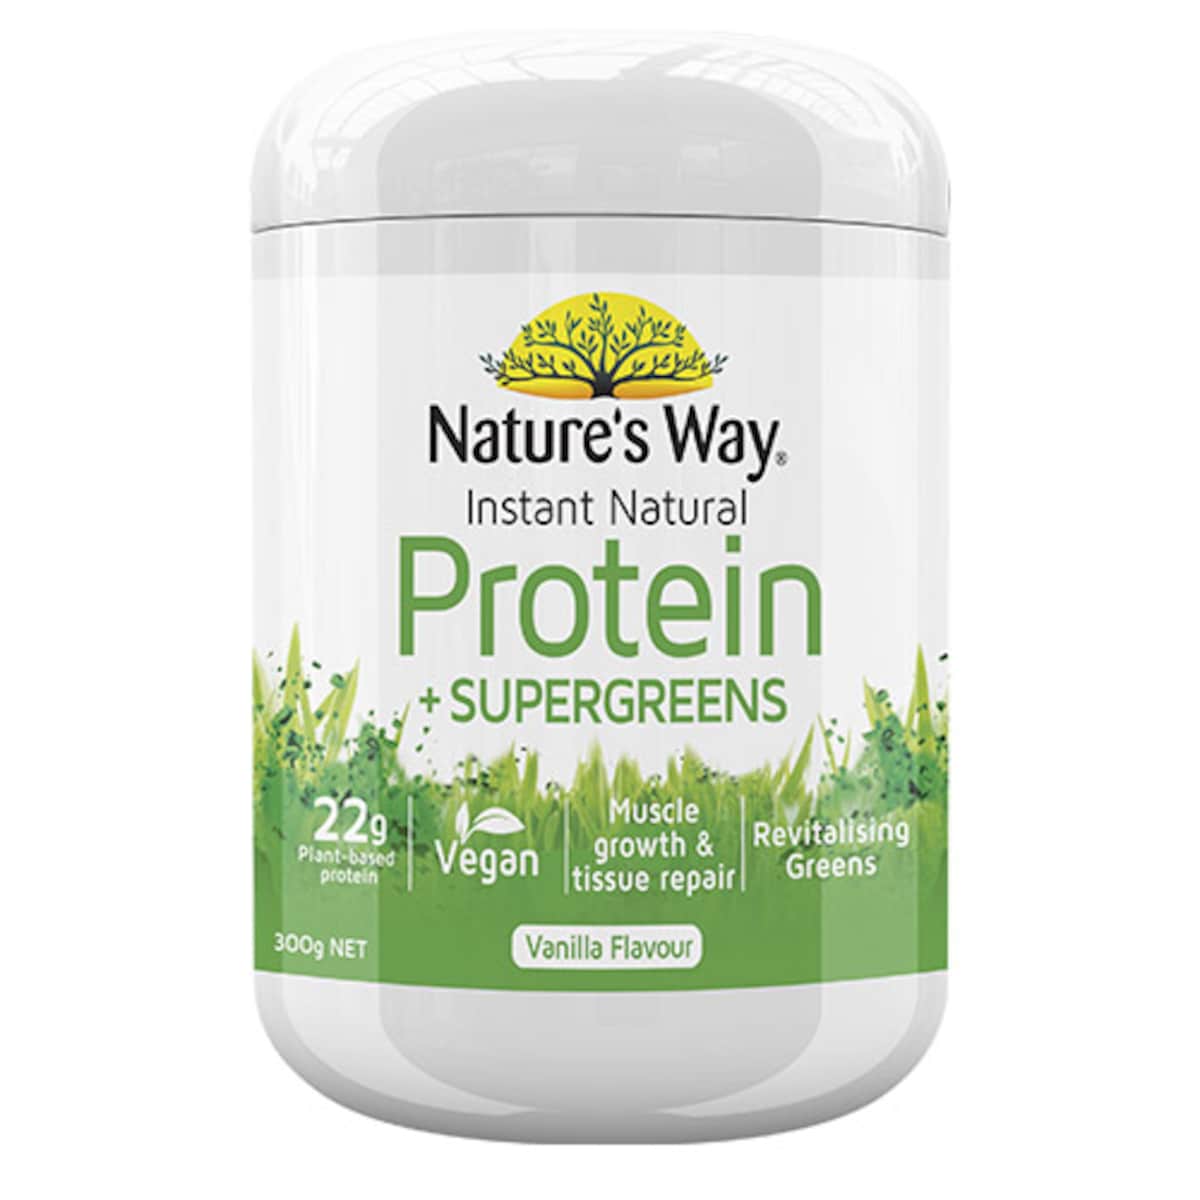 Natures Way Instant Natural Protein with Supergreens 300g Australia